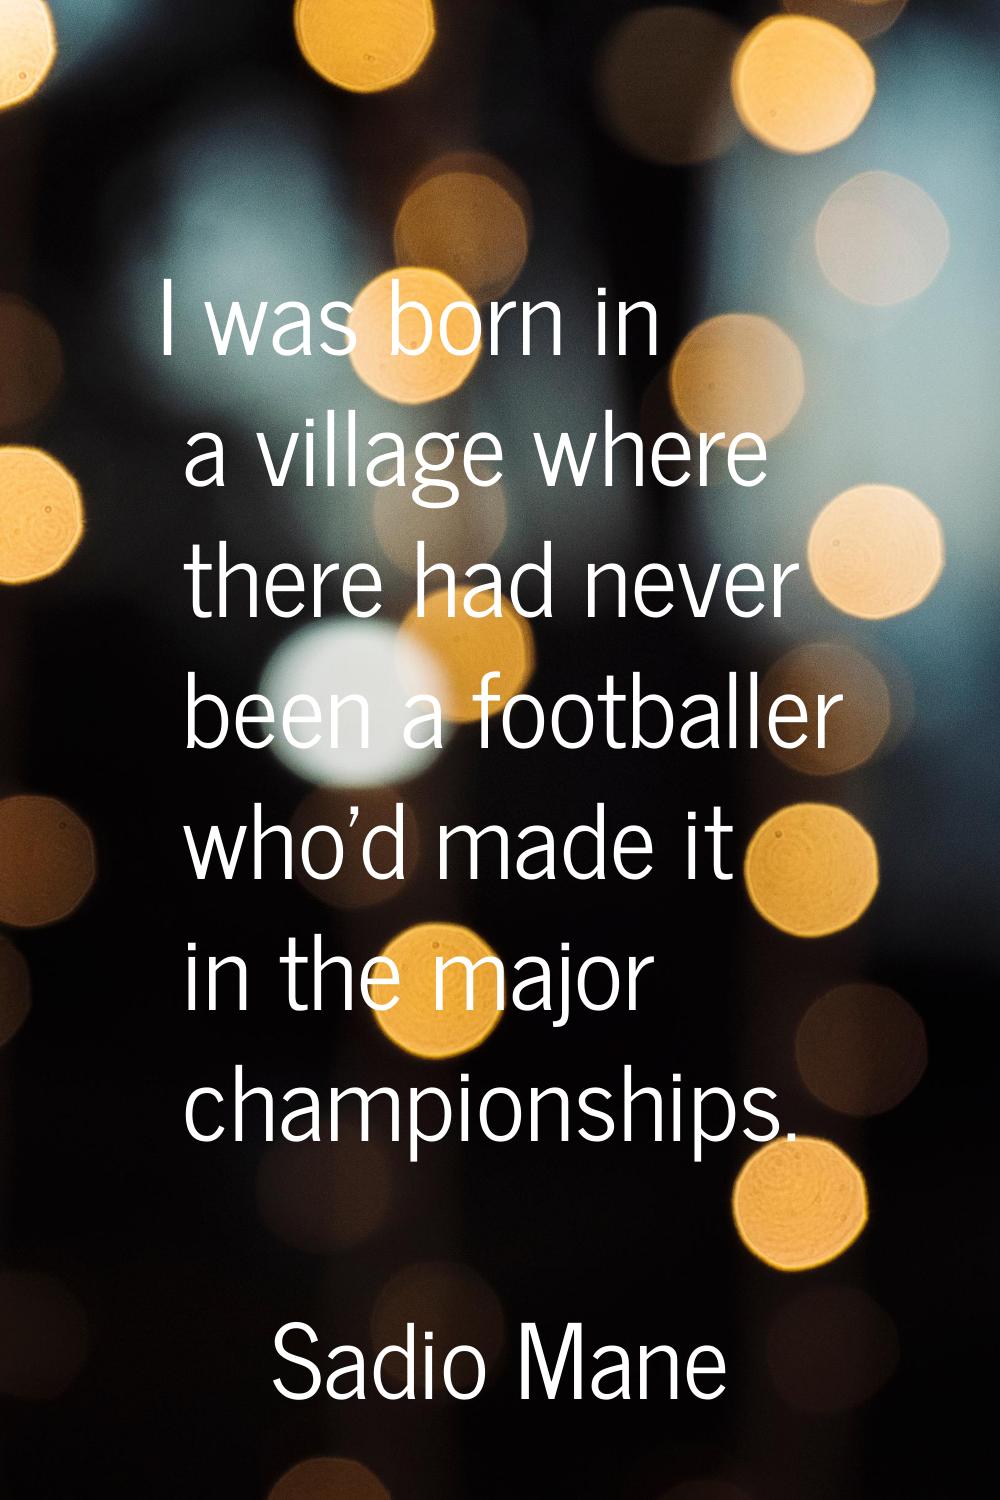 I was born in a village where there had never been a footballer who'd made it in the major champion